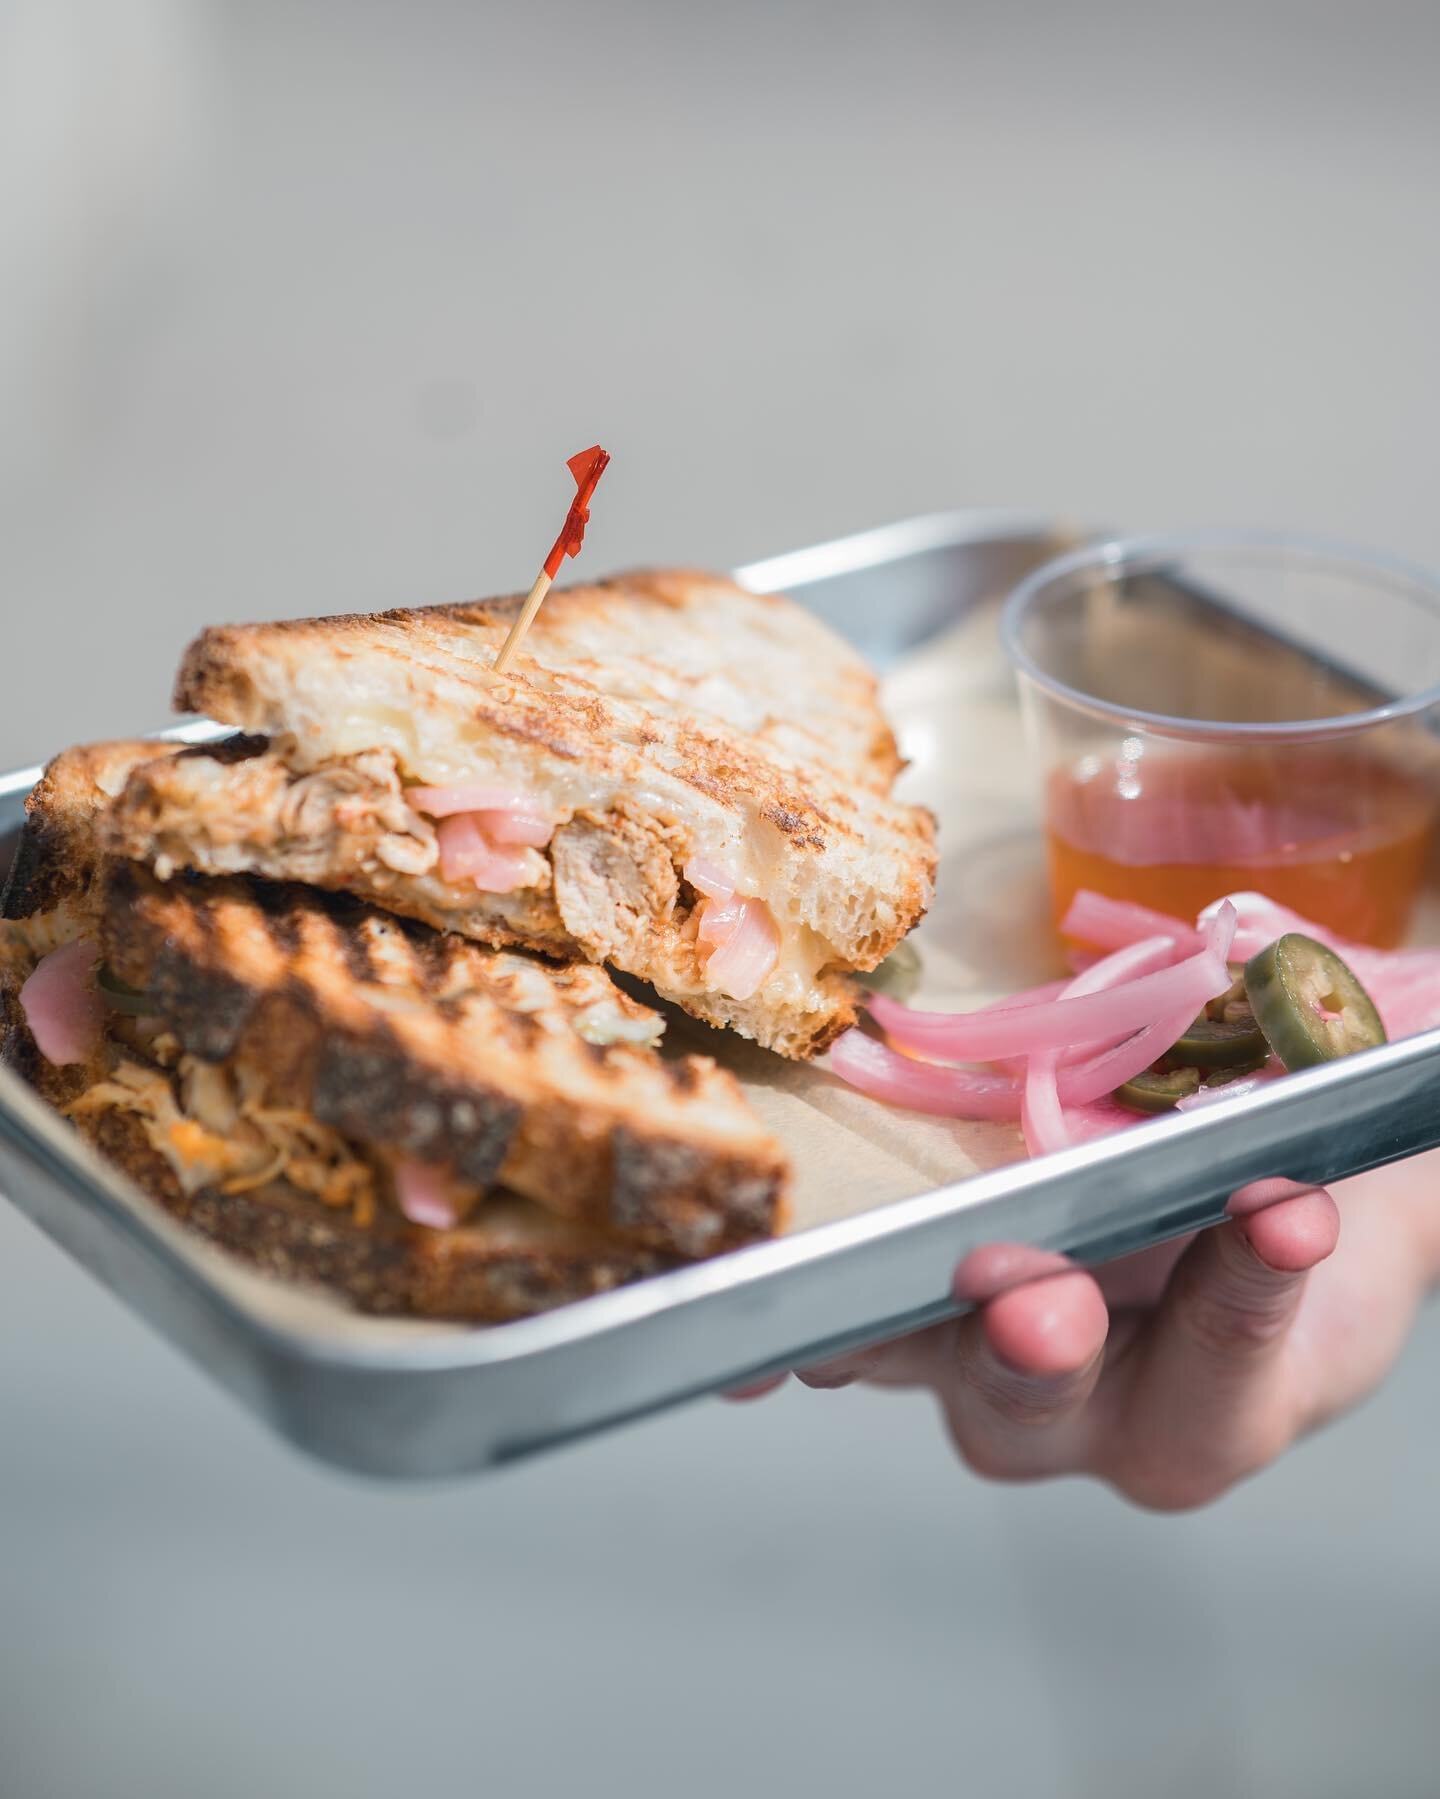 NEW SPECIAL: Hot Honey Chicken Melt 😍 

Try our new limited time sandwich today! Tender red pepper pulled chicken with cheddar cheese, pickled jalape&ntilde;o onions, and house made hot honey to finish it off!